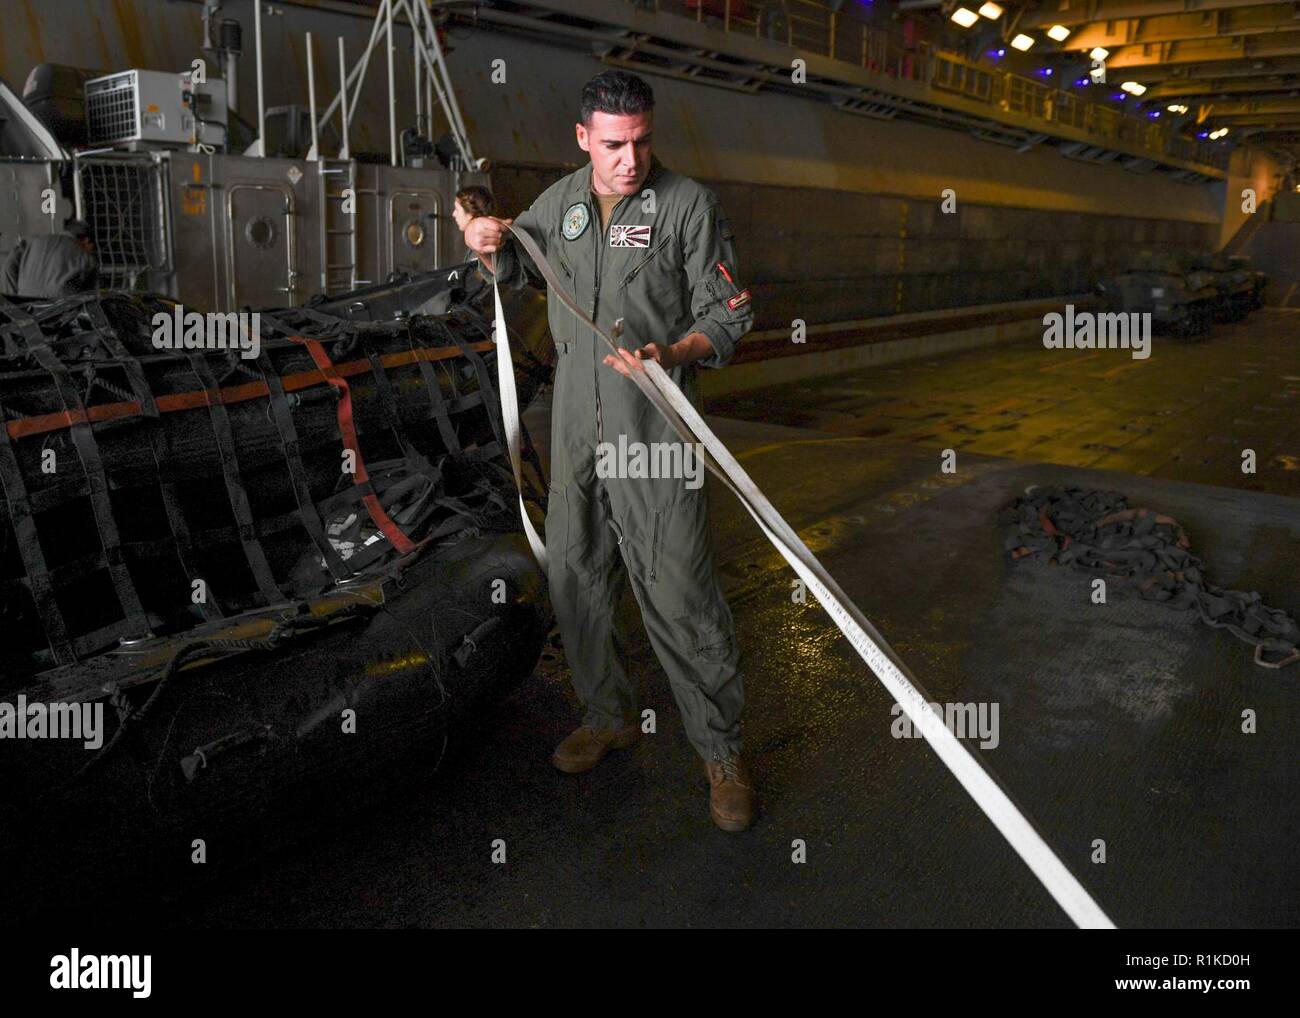 EAST CHINA SEA (Oct. 14, 2018) Boatswain’s Mate 1st Class Benny Genovese, assigned to Naval Beach Unit 7, prepares to strap down a combat raiding rubber craft aboard a landing craft, air cushion, in the well deck of the amphibious assault ship USS Wasp (LHD 1) during integrated unit level training. Wasp, flagship of Wasp Amphibious Ready Group, with embarked 31st Marine Expeditionary Unit, is operating in the Indo-Pacific region to enhance interoperability with partners and serve as a ready-response force for any type of contingency. Stock Photo